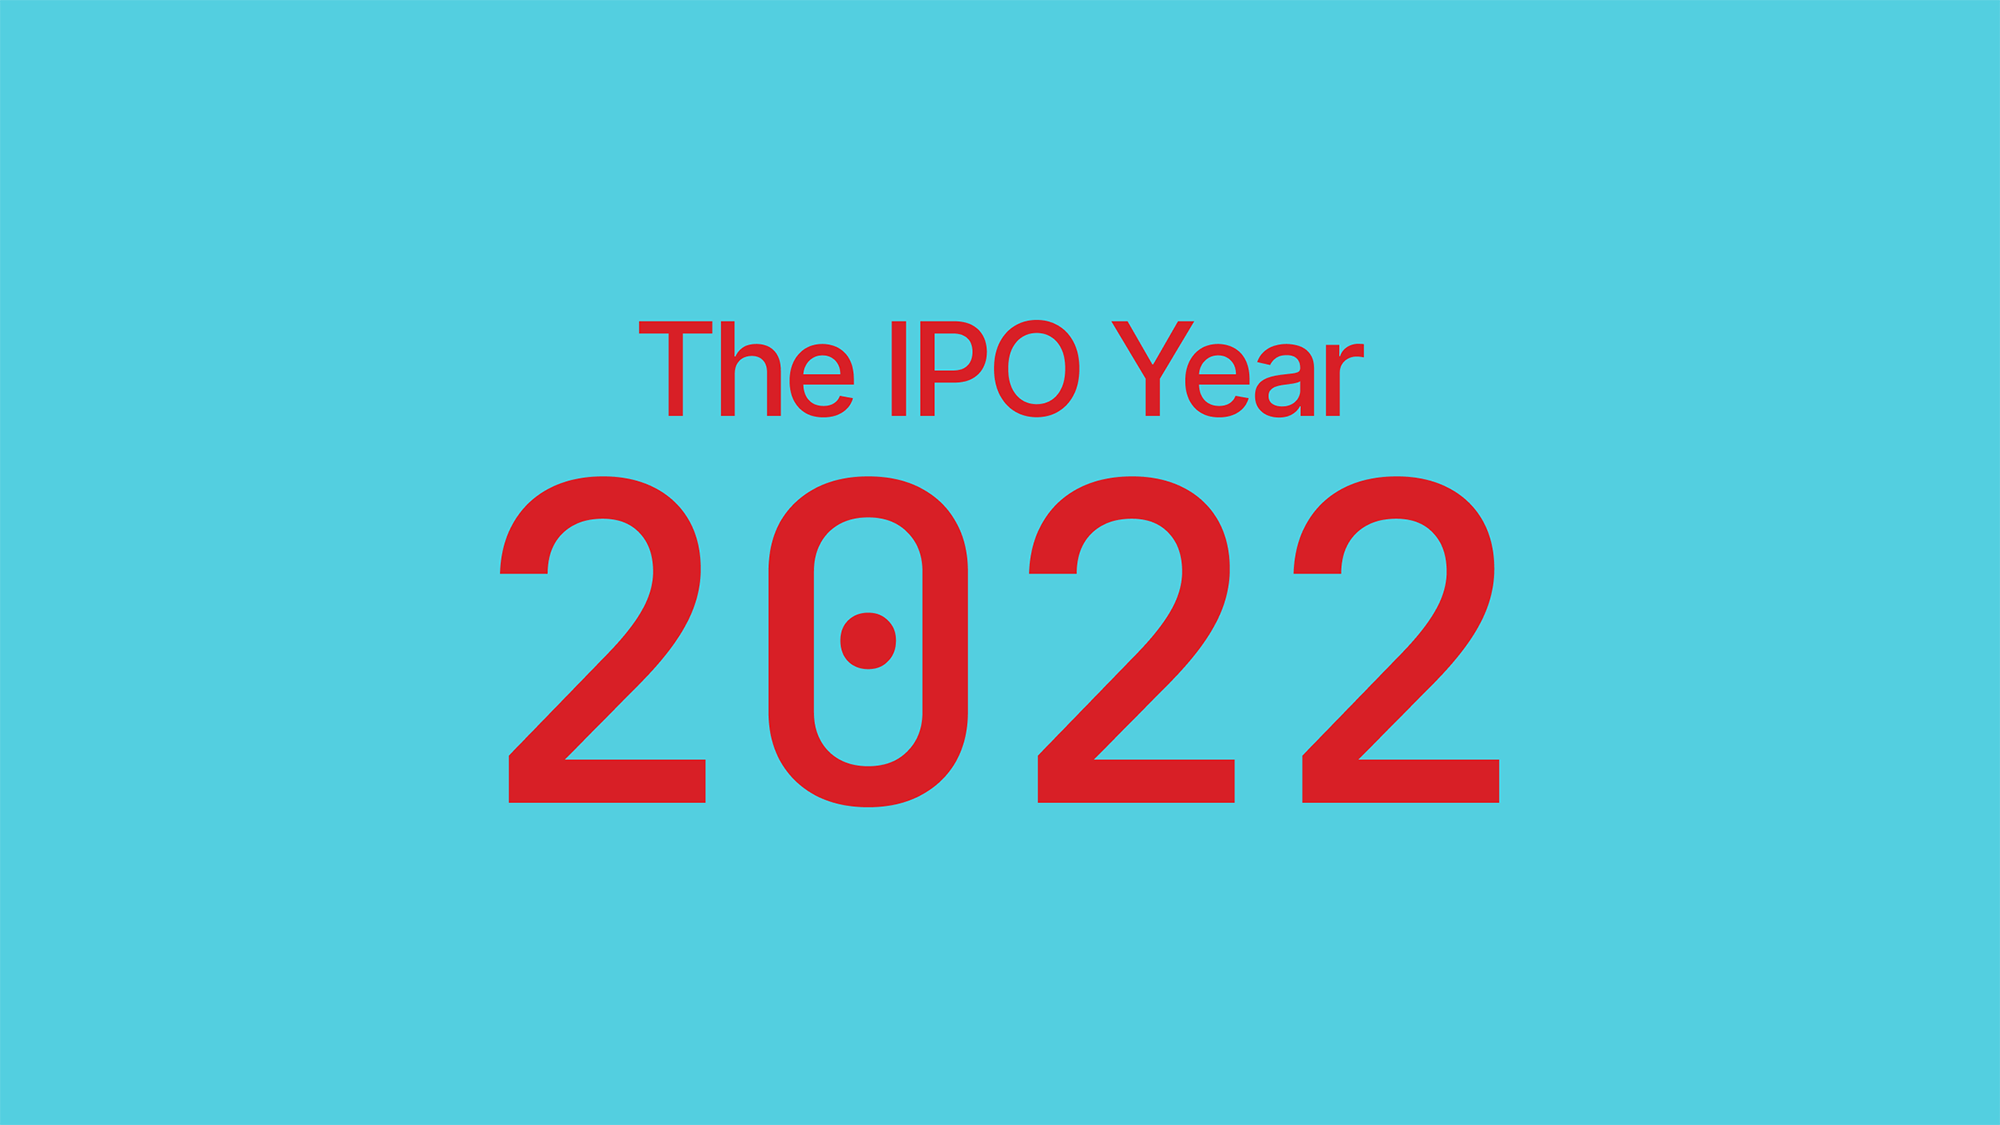 The IPO Year 2022